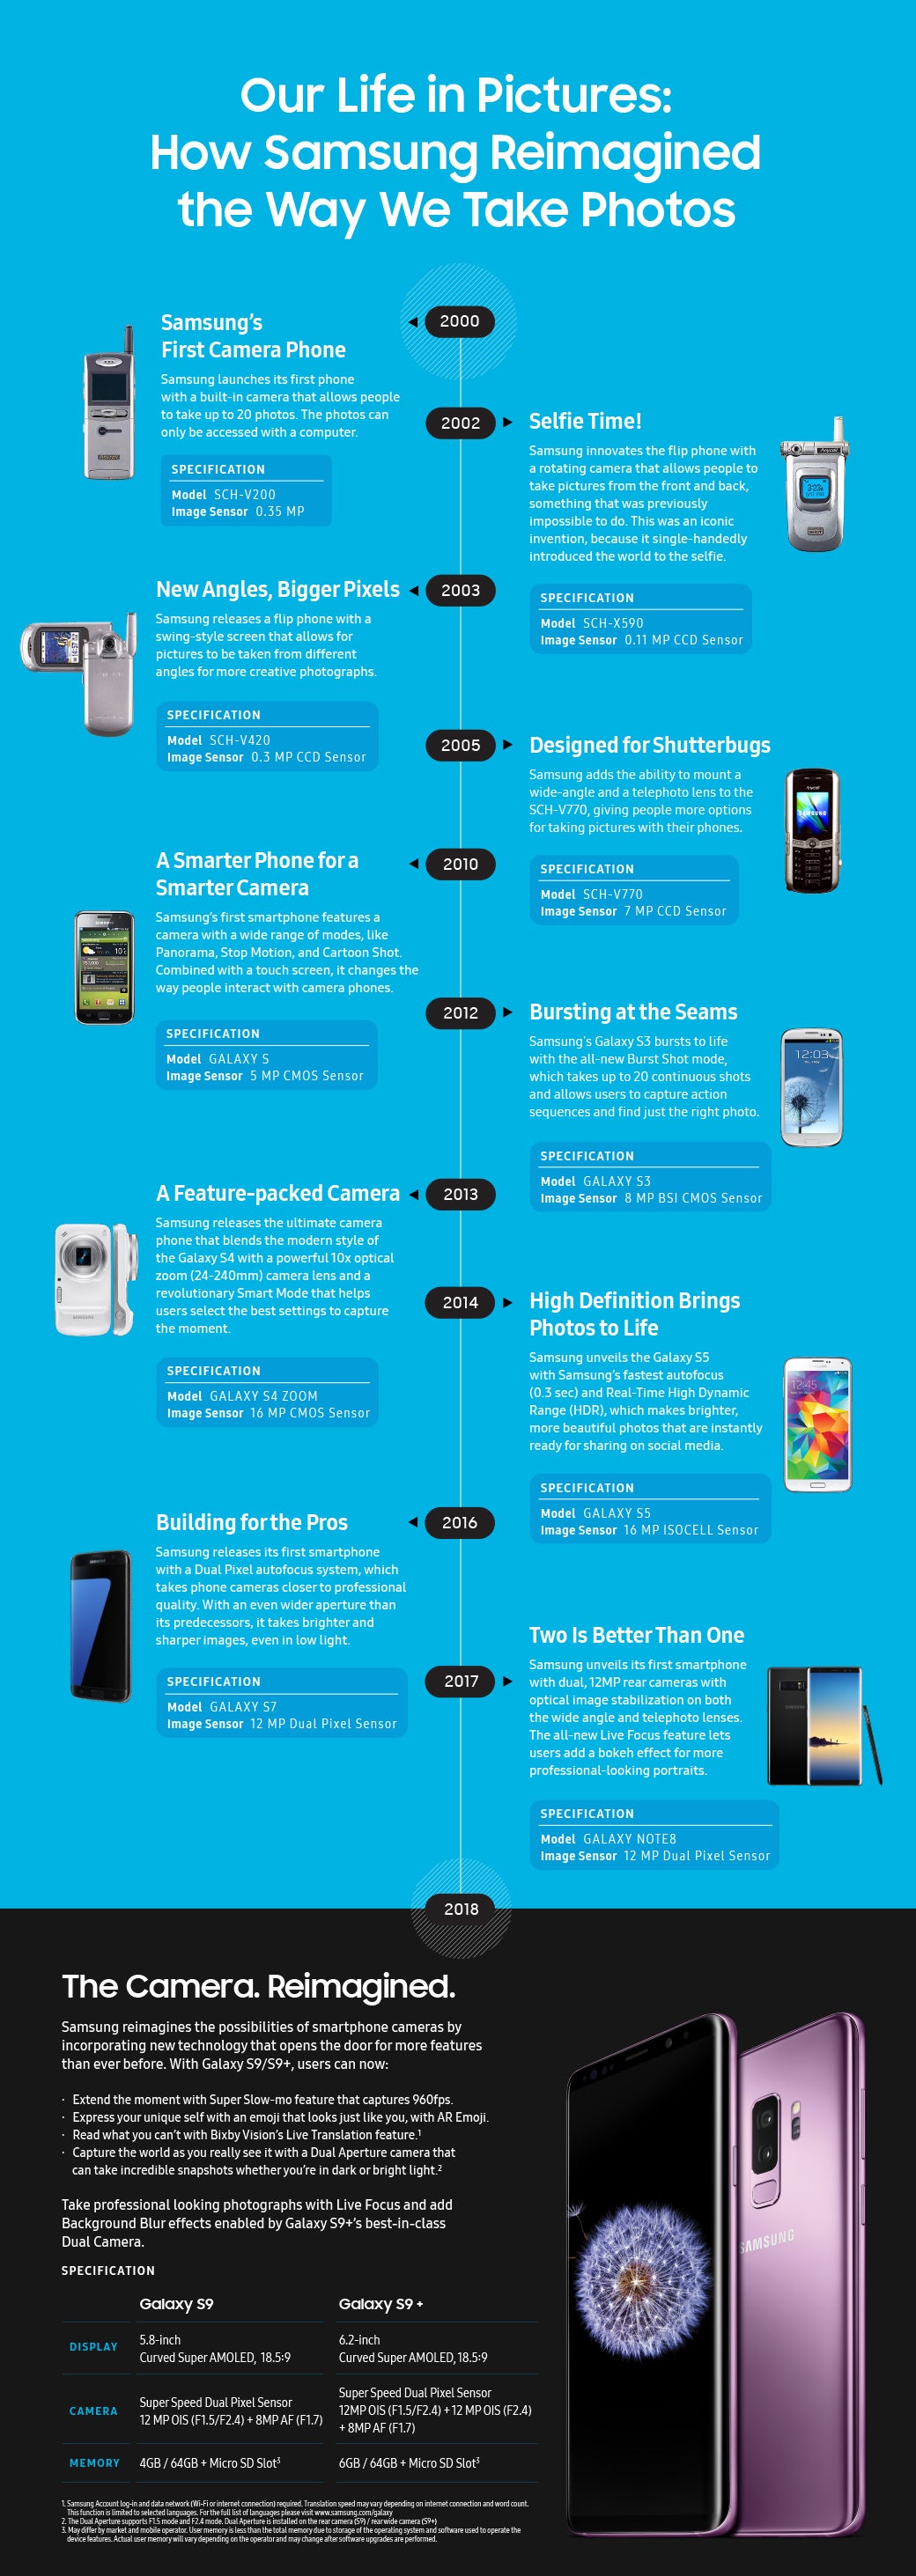 Samsung gets historical with its phone camera innovation (infographic)